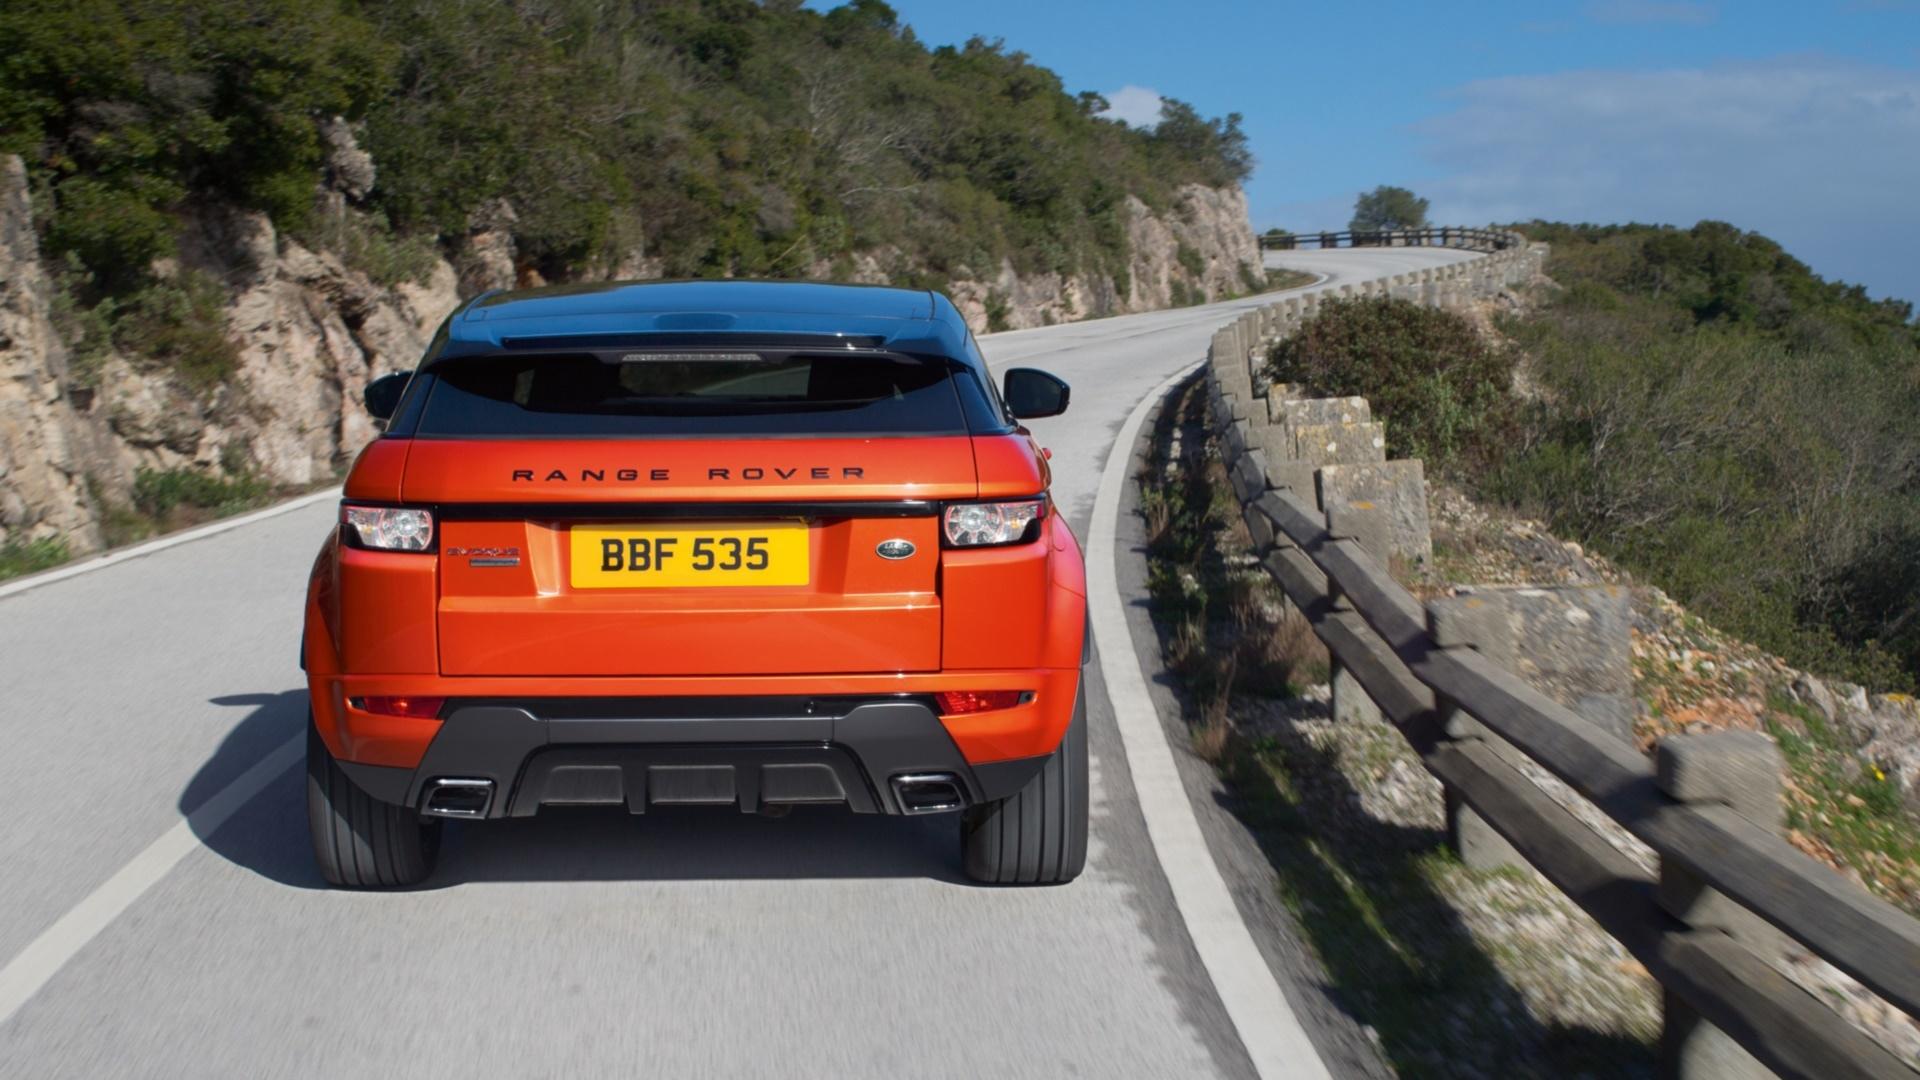 2015 Range Rover Evoque Autobiography wallpapers HD quality